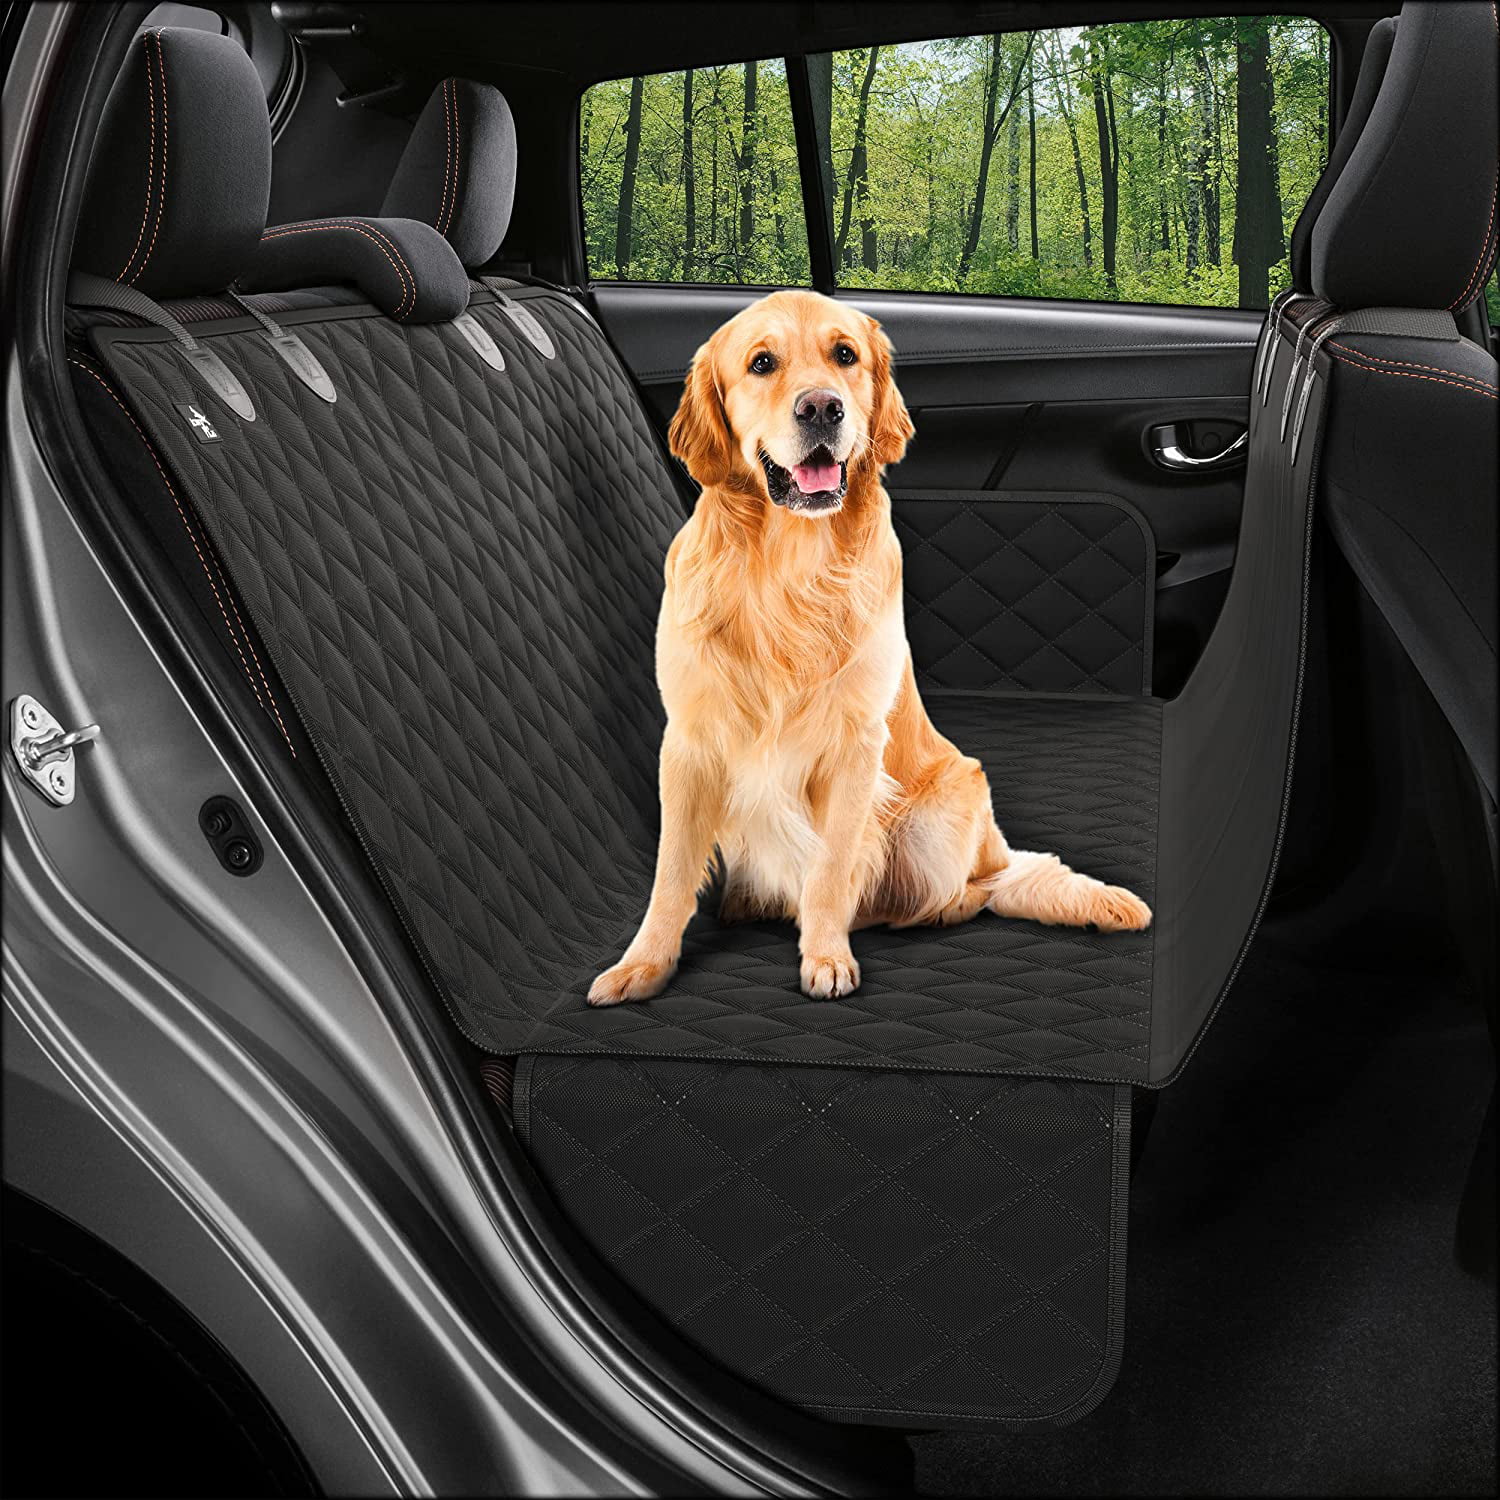 Dog Backseat Cover for Cars Trucks SU ［Upgraded Version］ Dog Seat Cover for Back Seat Car Seat Covers for Dogs 100% Waterproof with Mesh Window Scratch Proof Nonslip Dog Car Hammock 